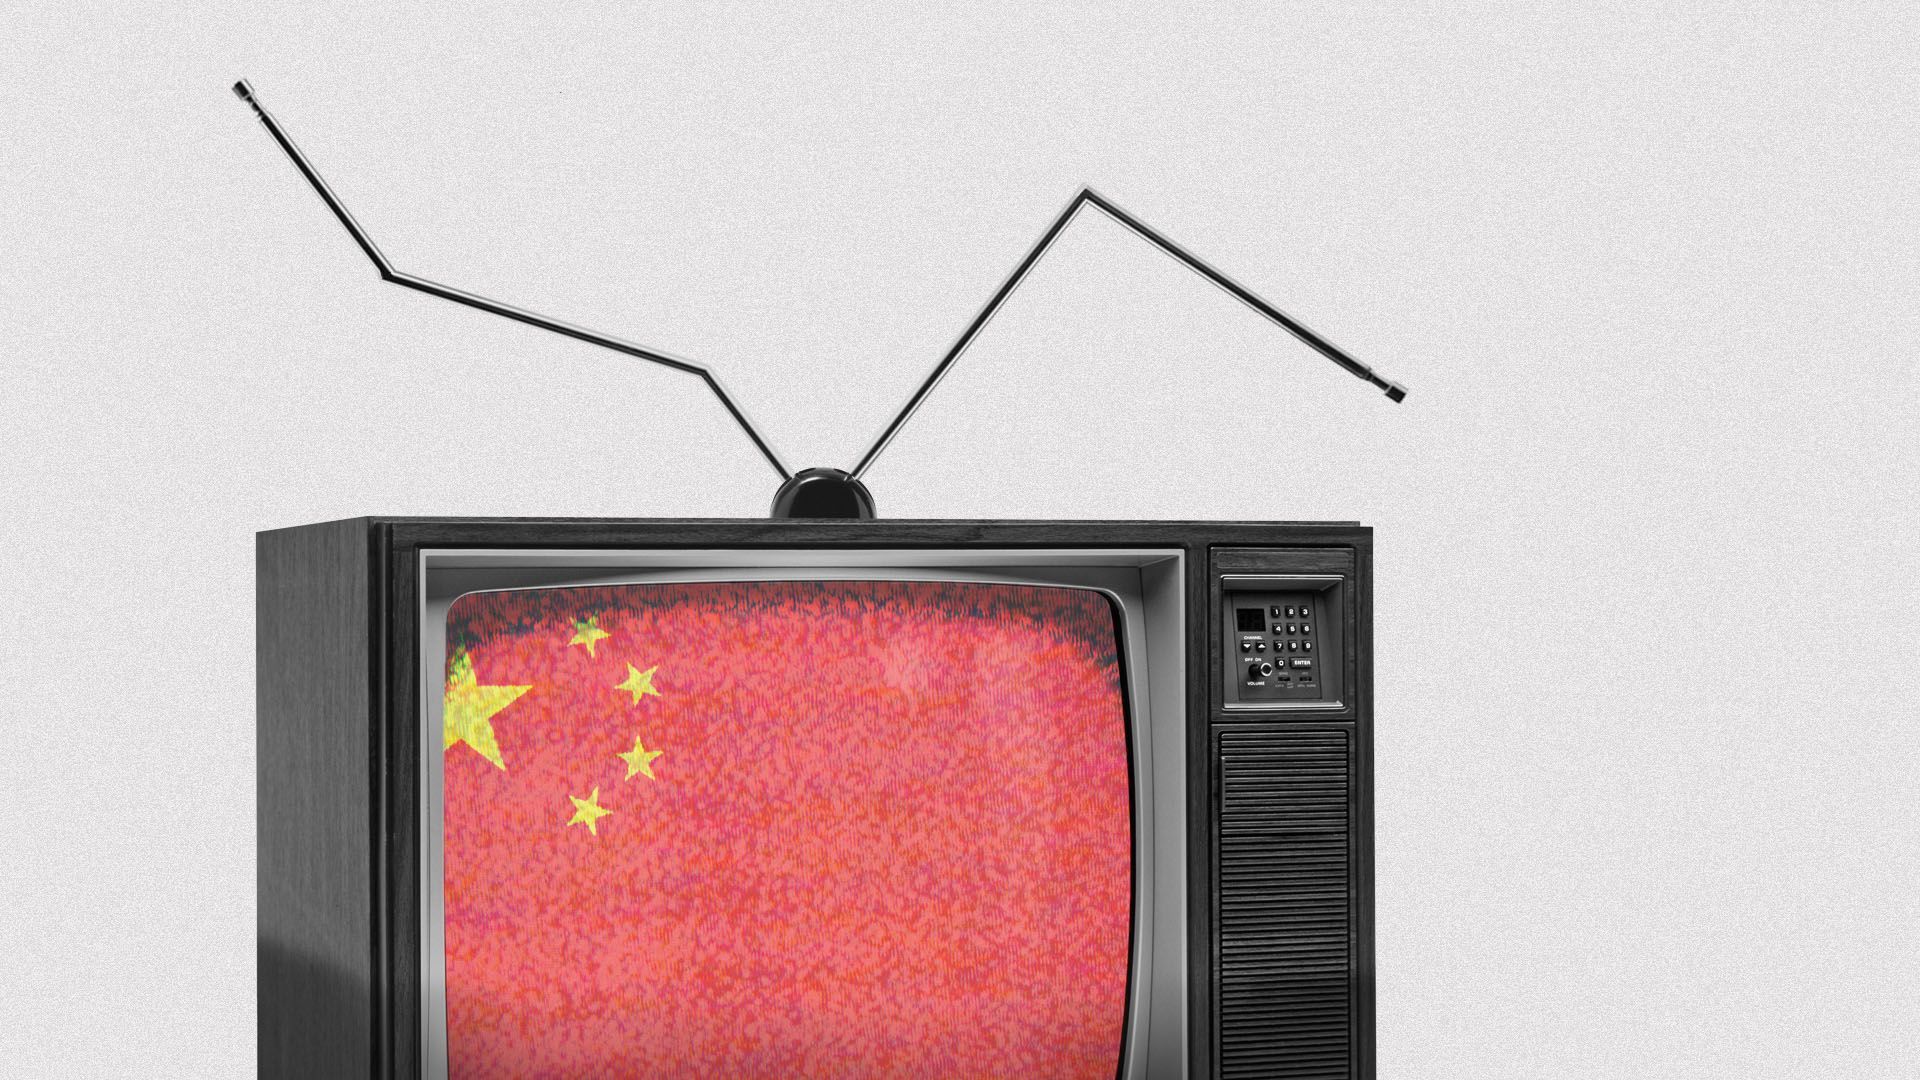 Illustration of a vintage television with bent antennae and a Chinese flag on the screen